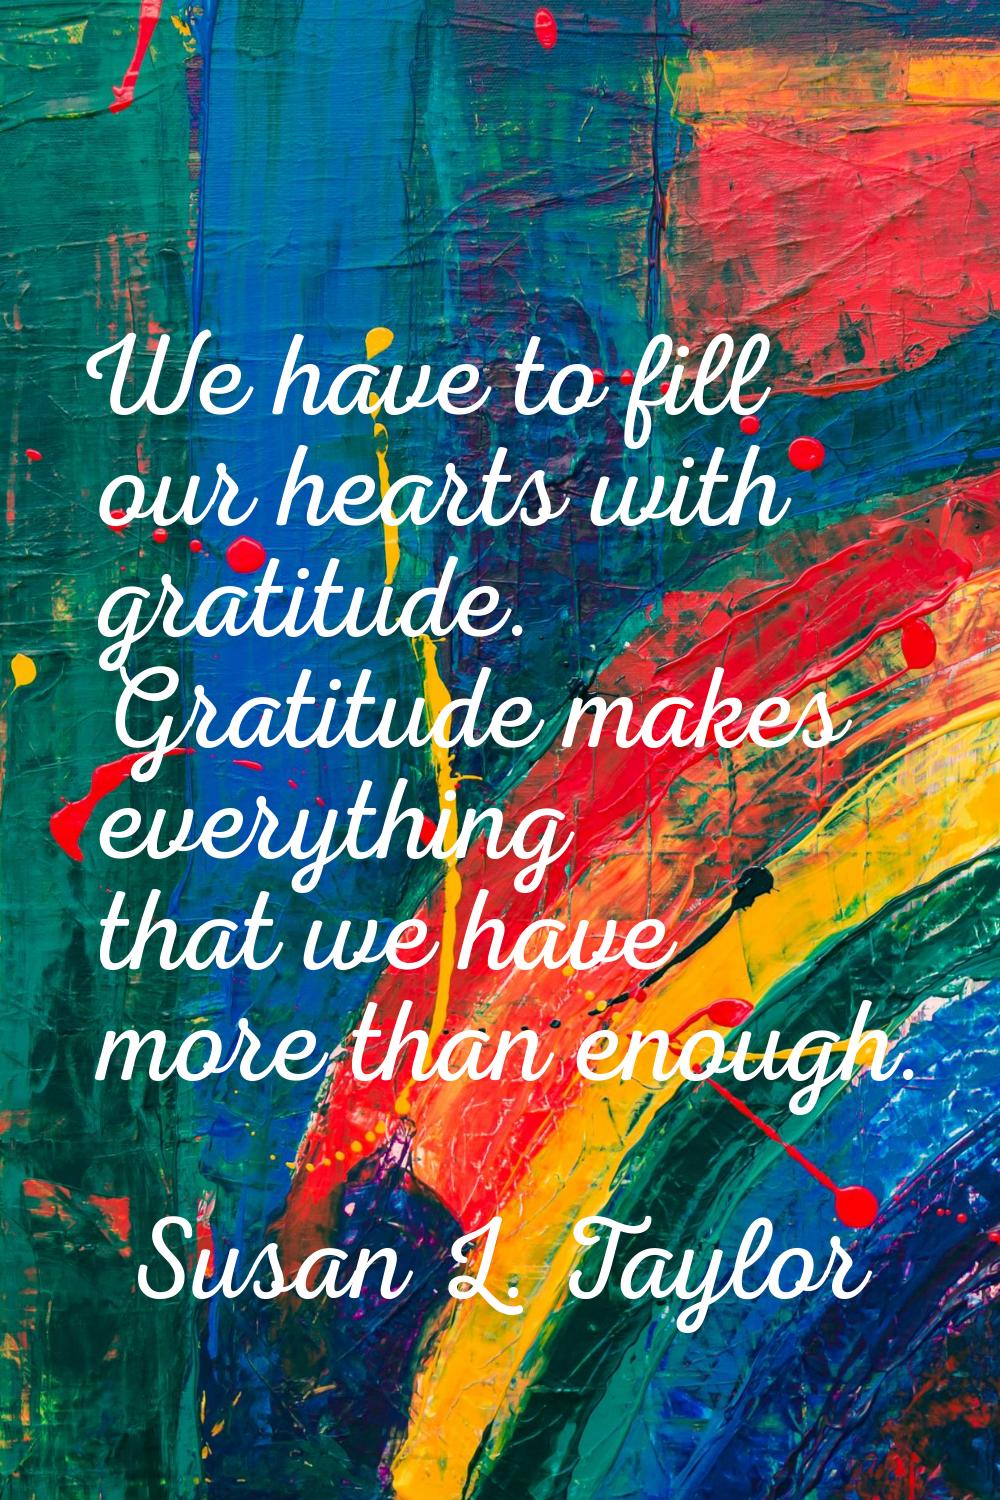 We have to fill our hearts with gratitude. Gratitude makes everything that we have more than enough